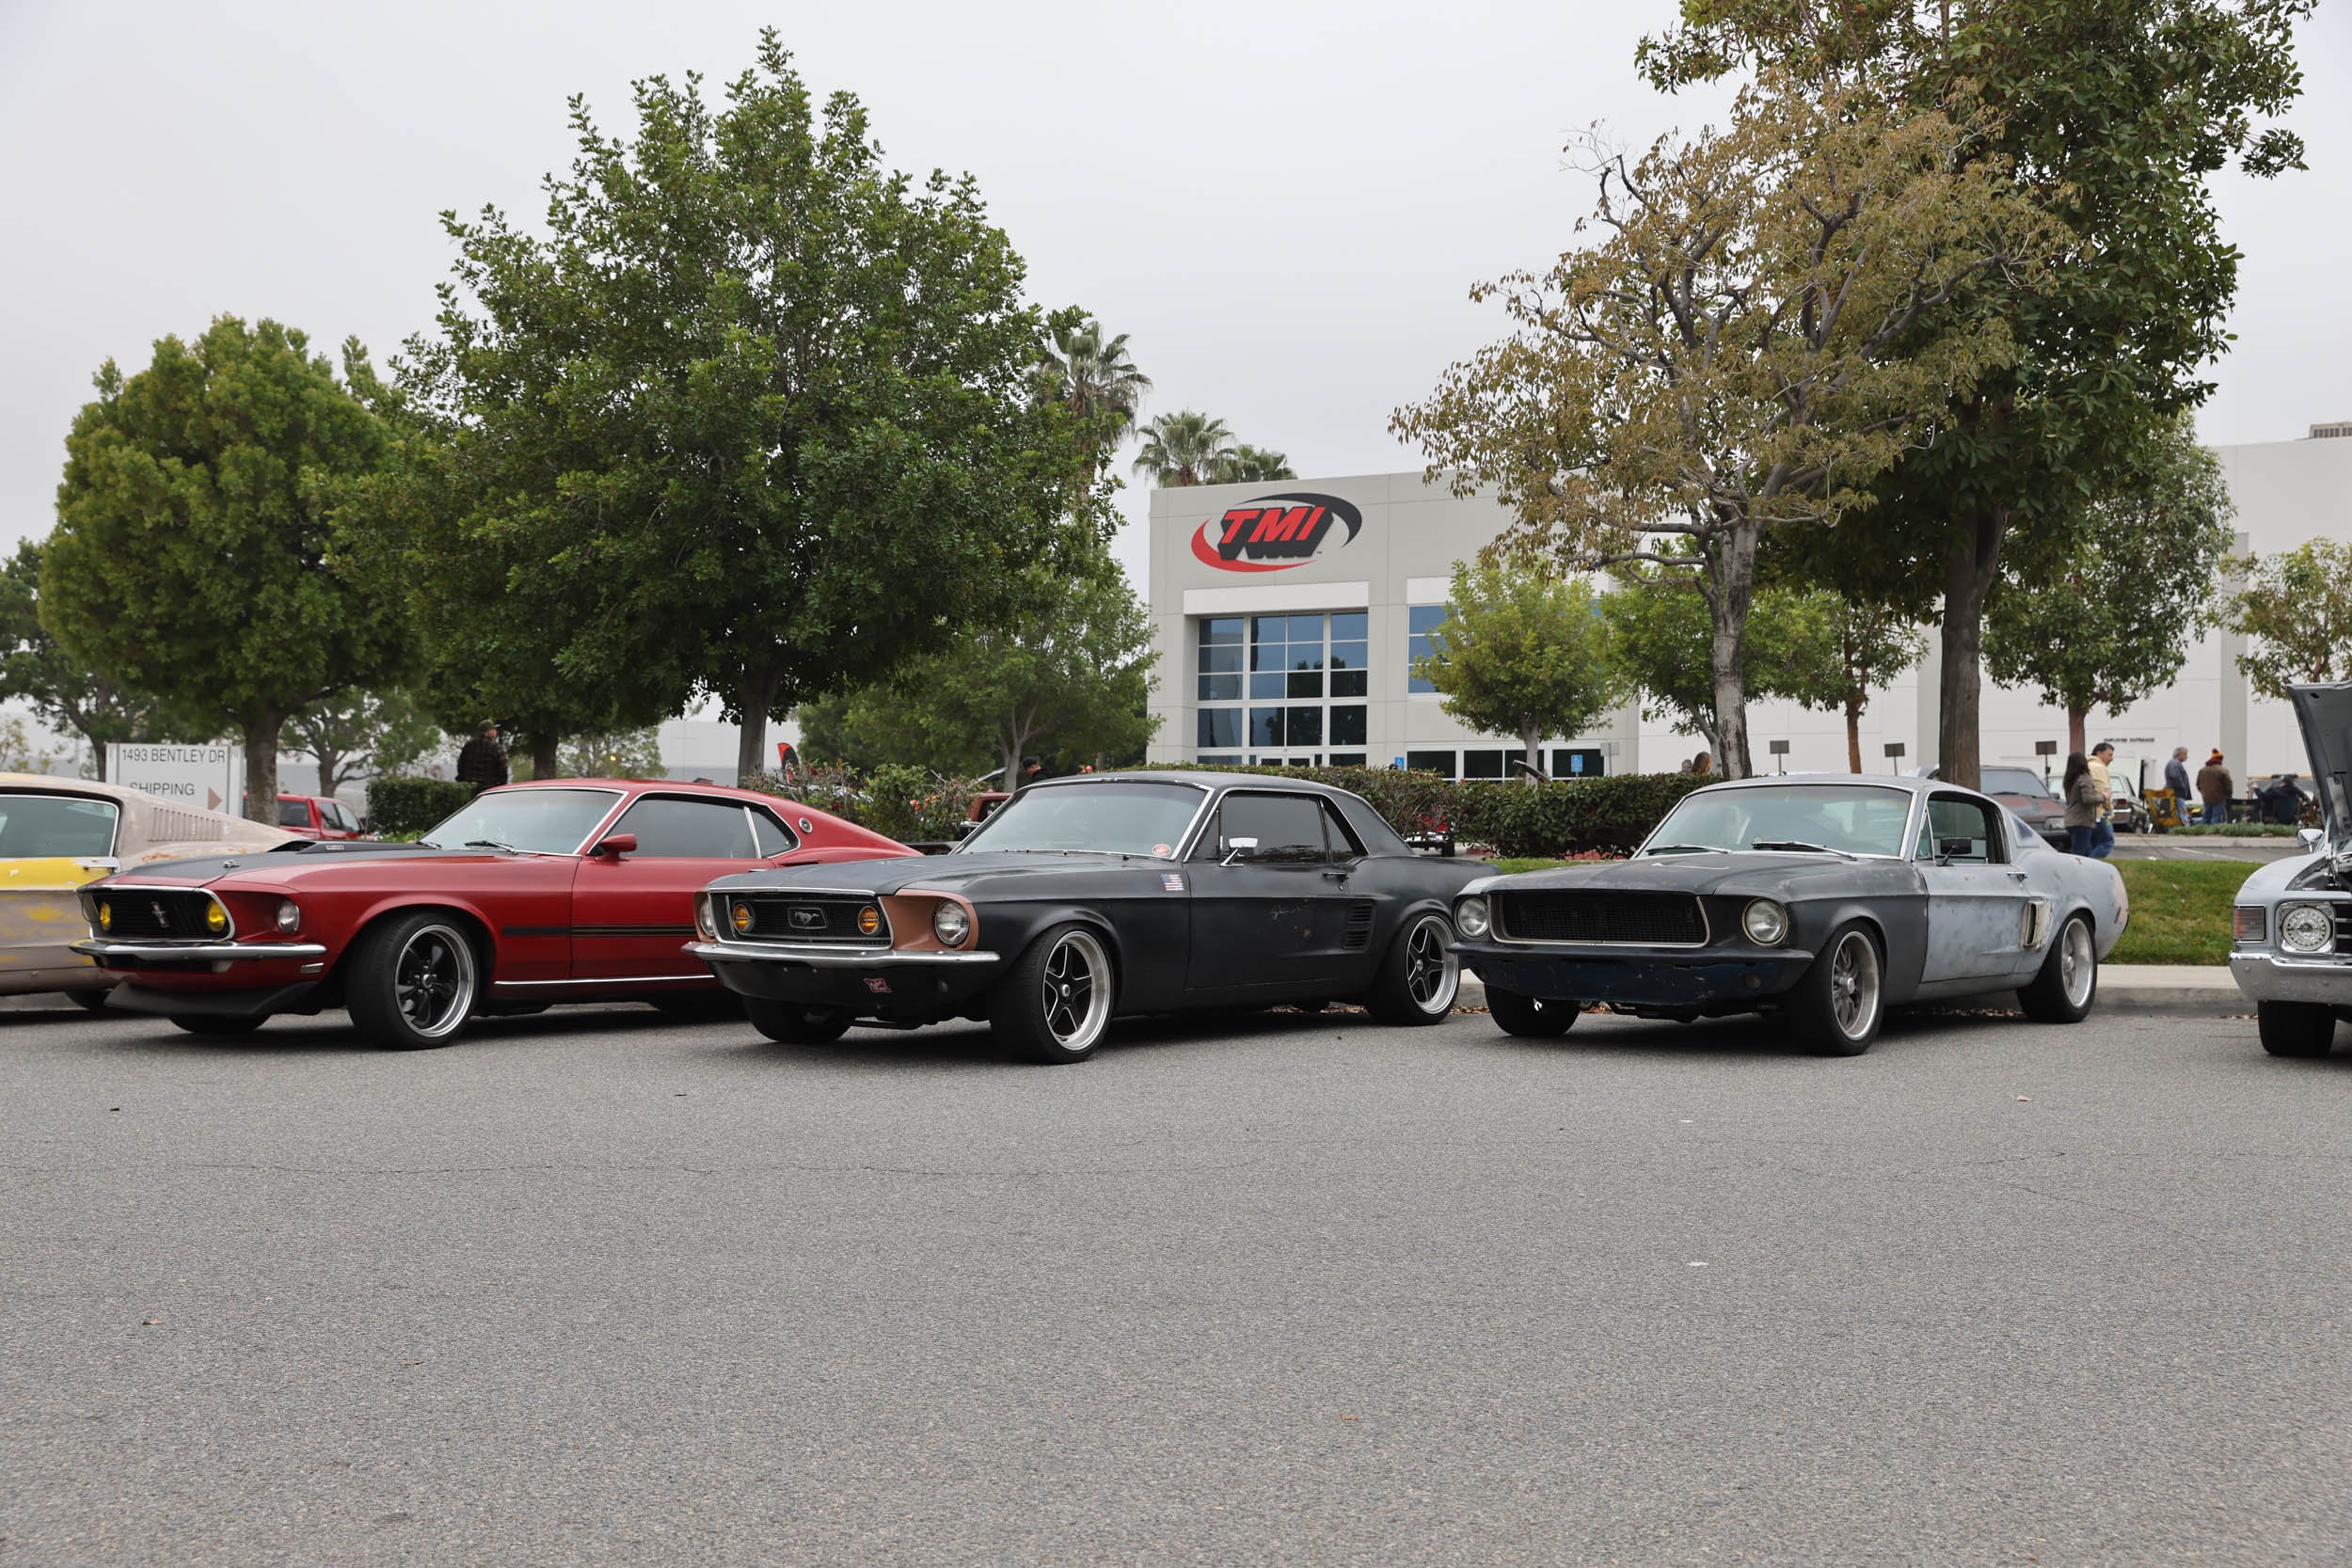 TMI Products Hosts Cars and Coffee Event and Opens Doors to New Design Studio